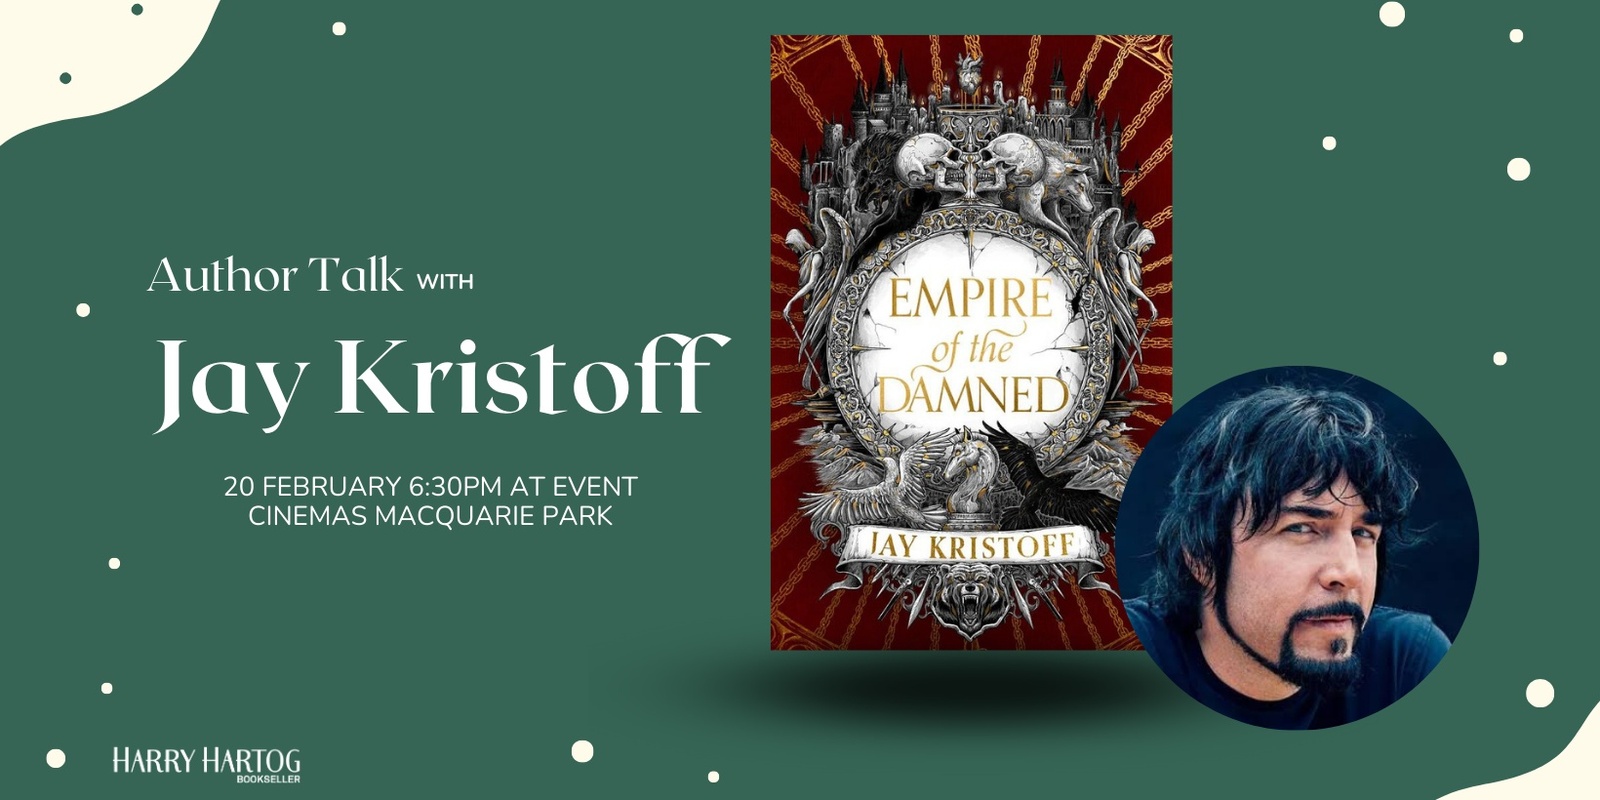 Banner image for Author Talk with Jay Kristoff